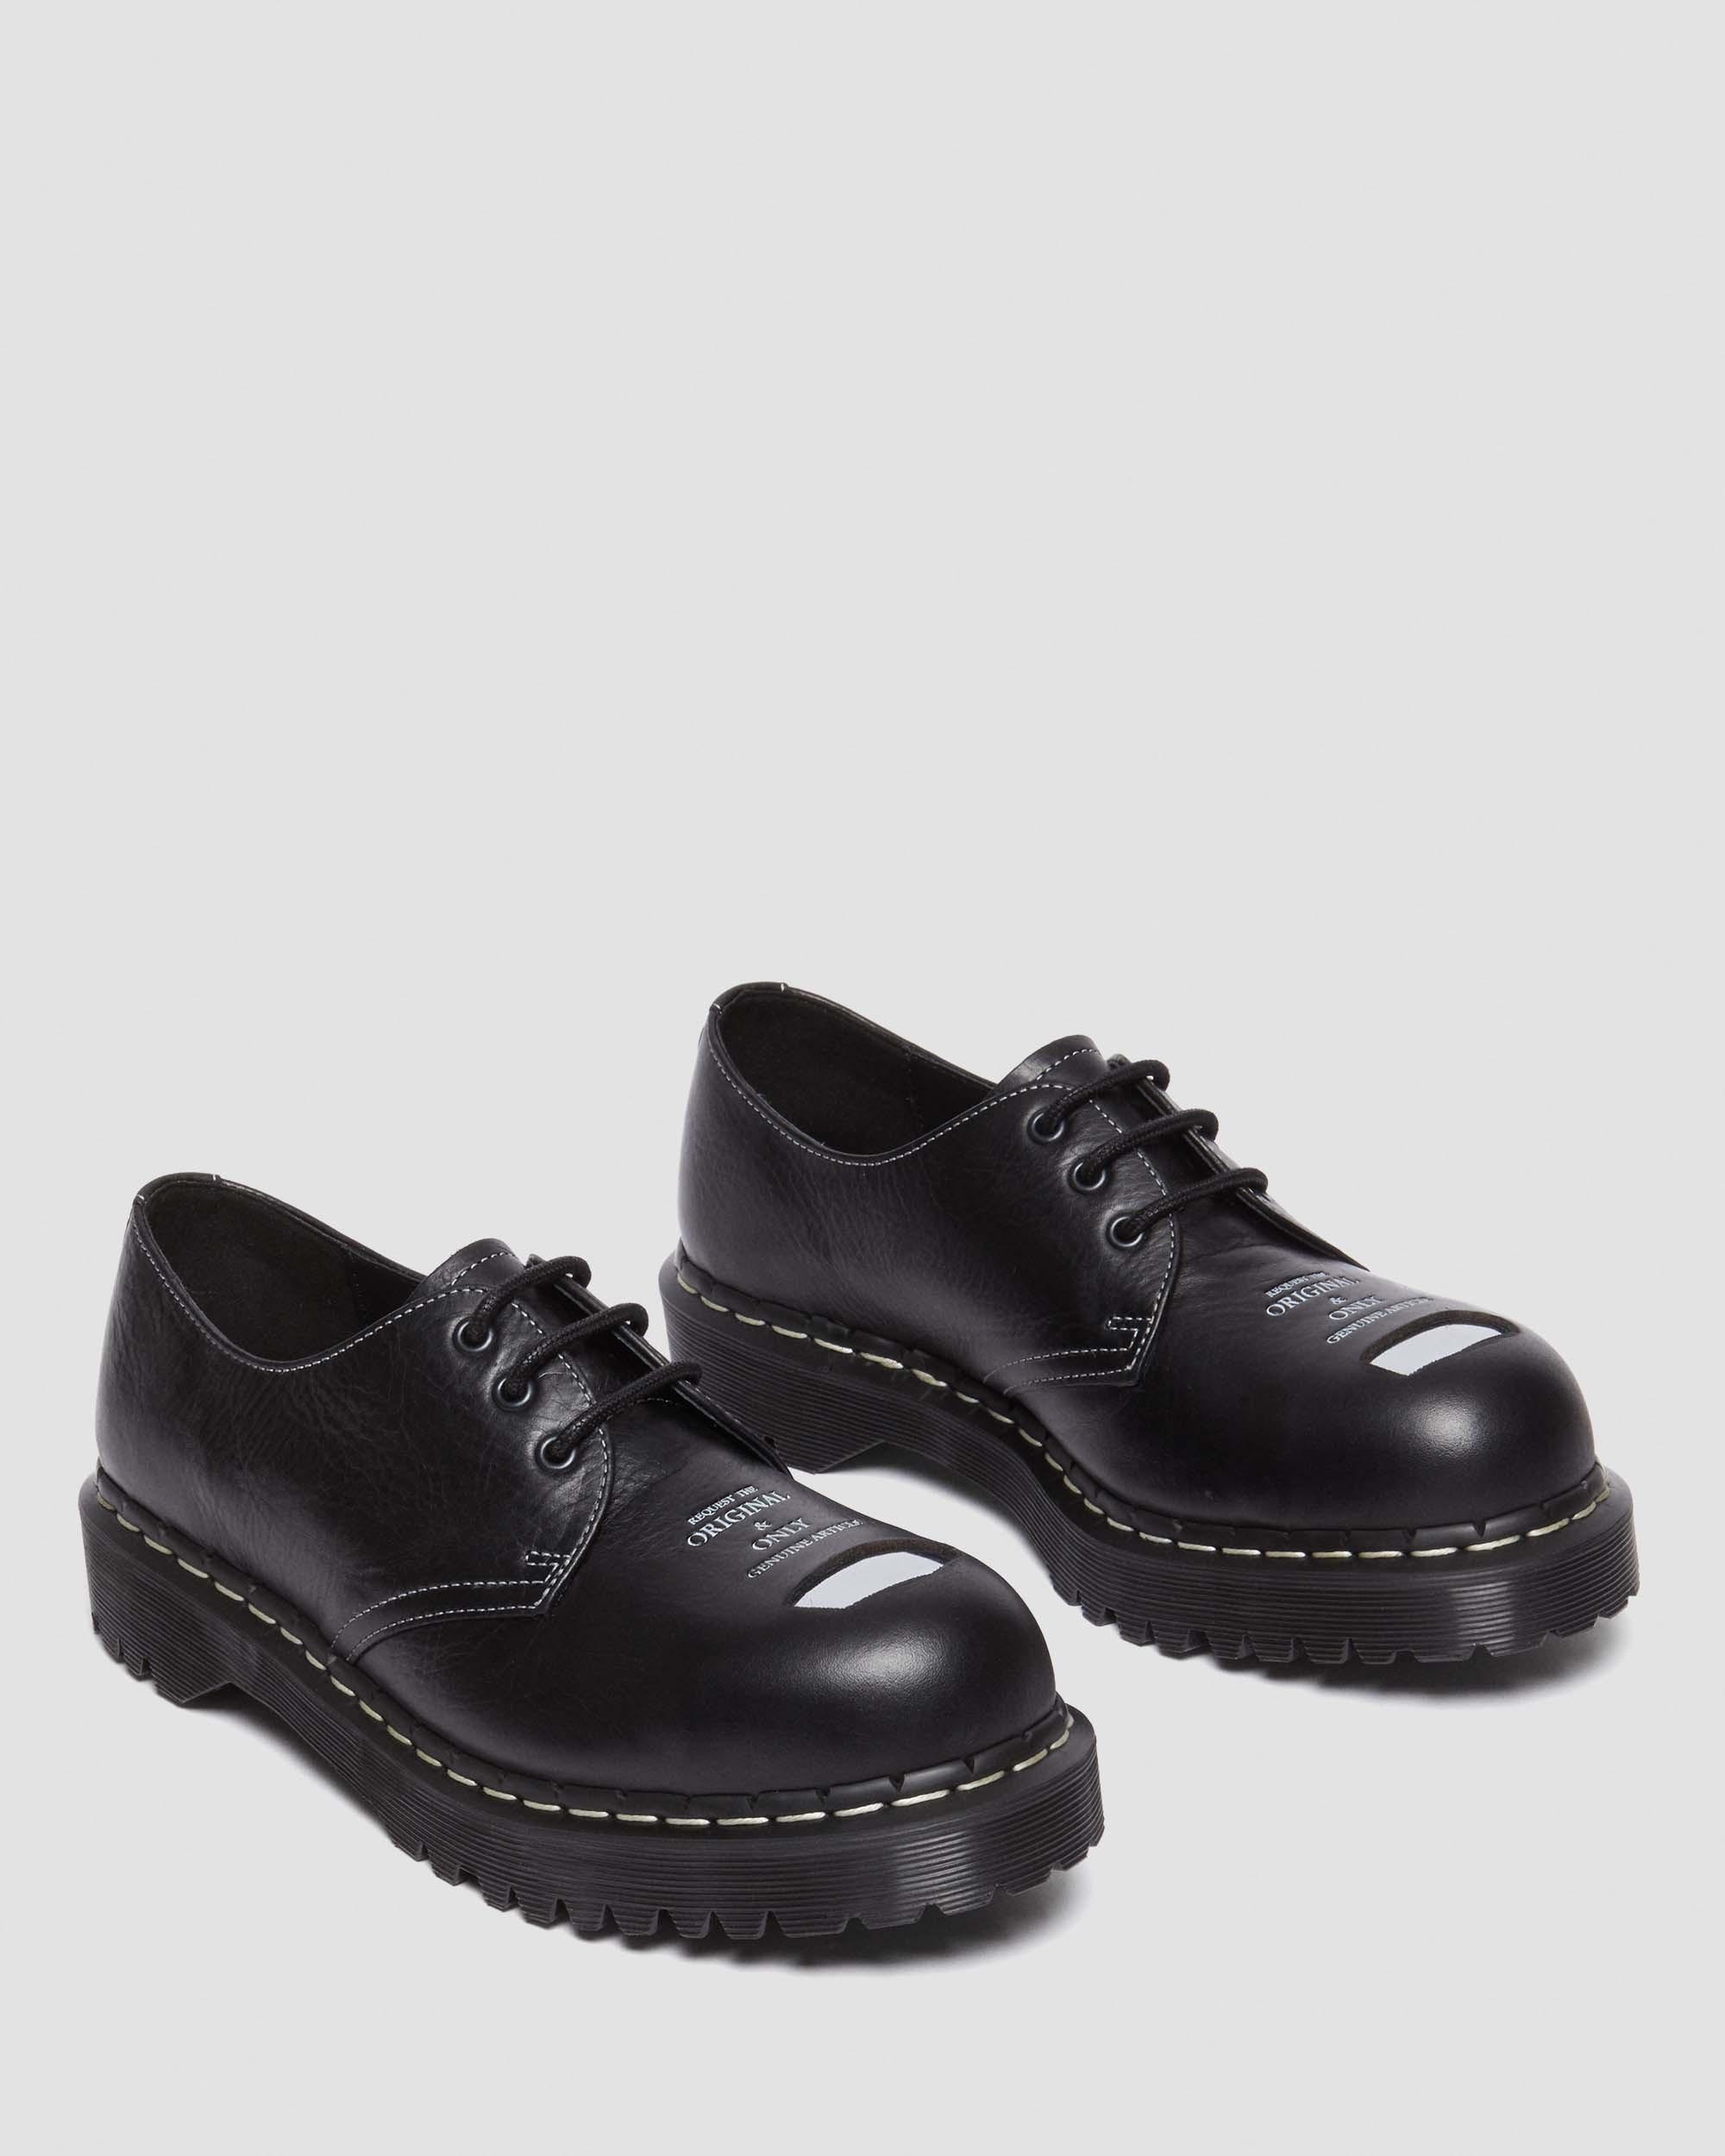 1461 Bex Exposed Steel Toe Oxford Shoes in Black | Dr. Martens